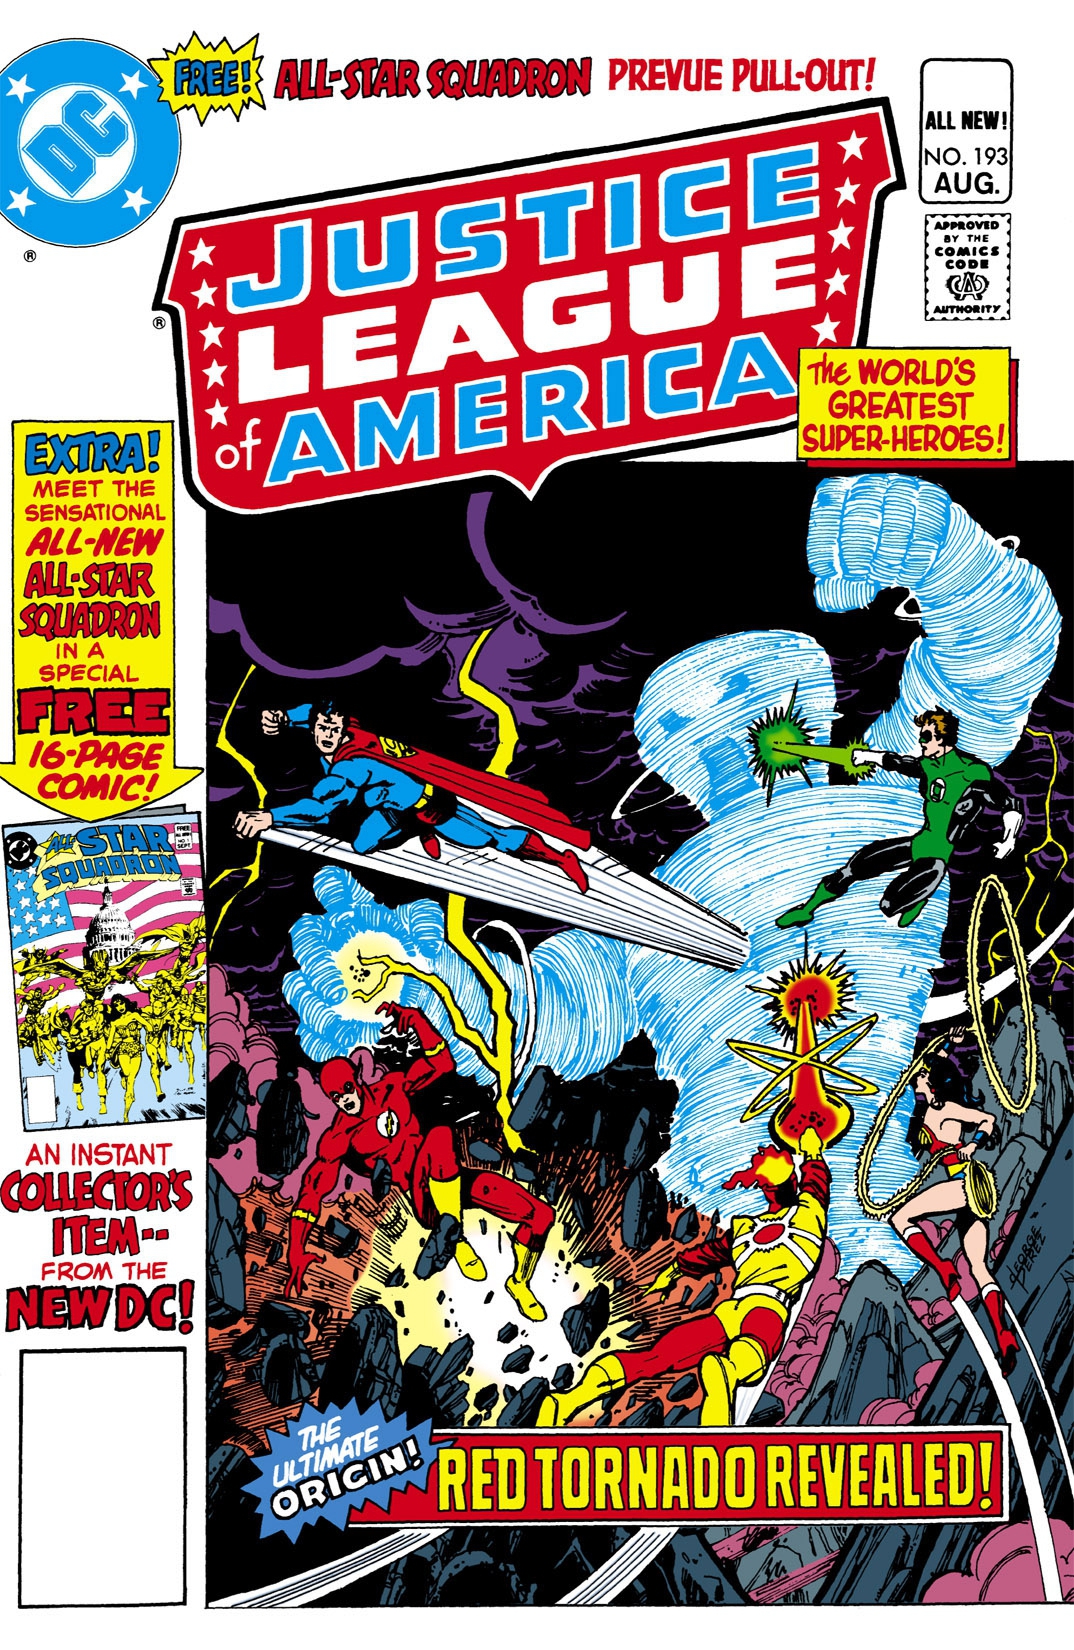 Justice League of America (1960-) #193 preview images